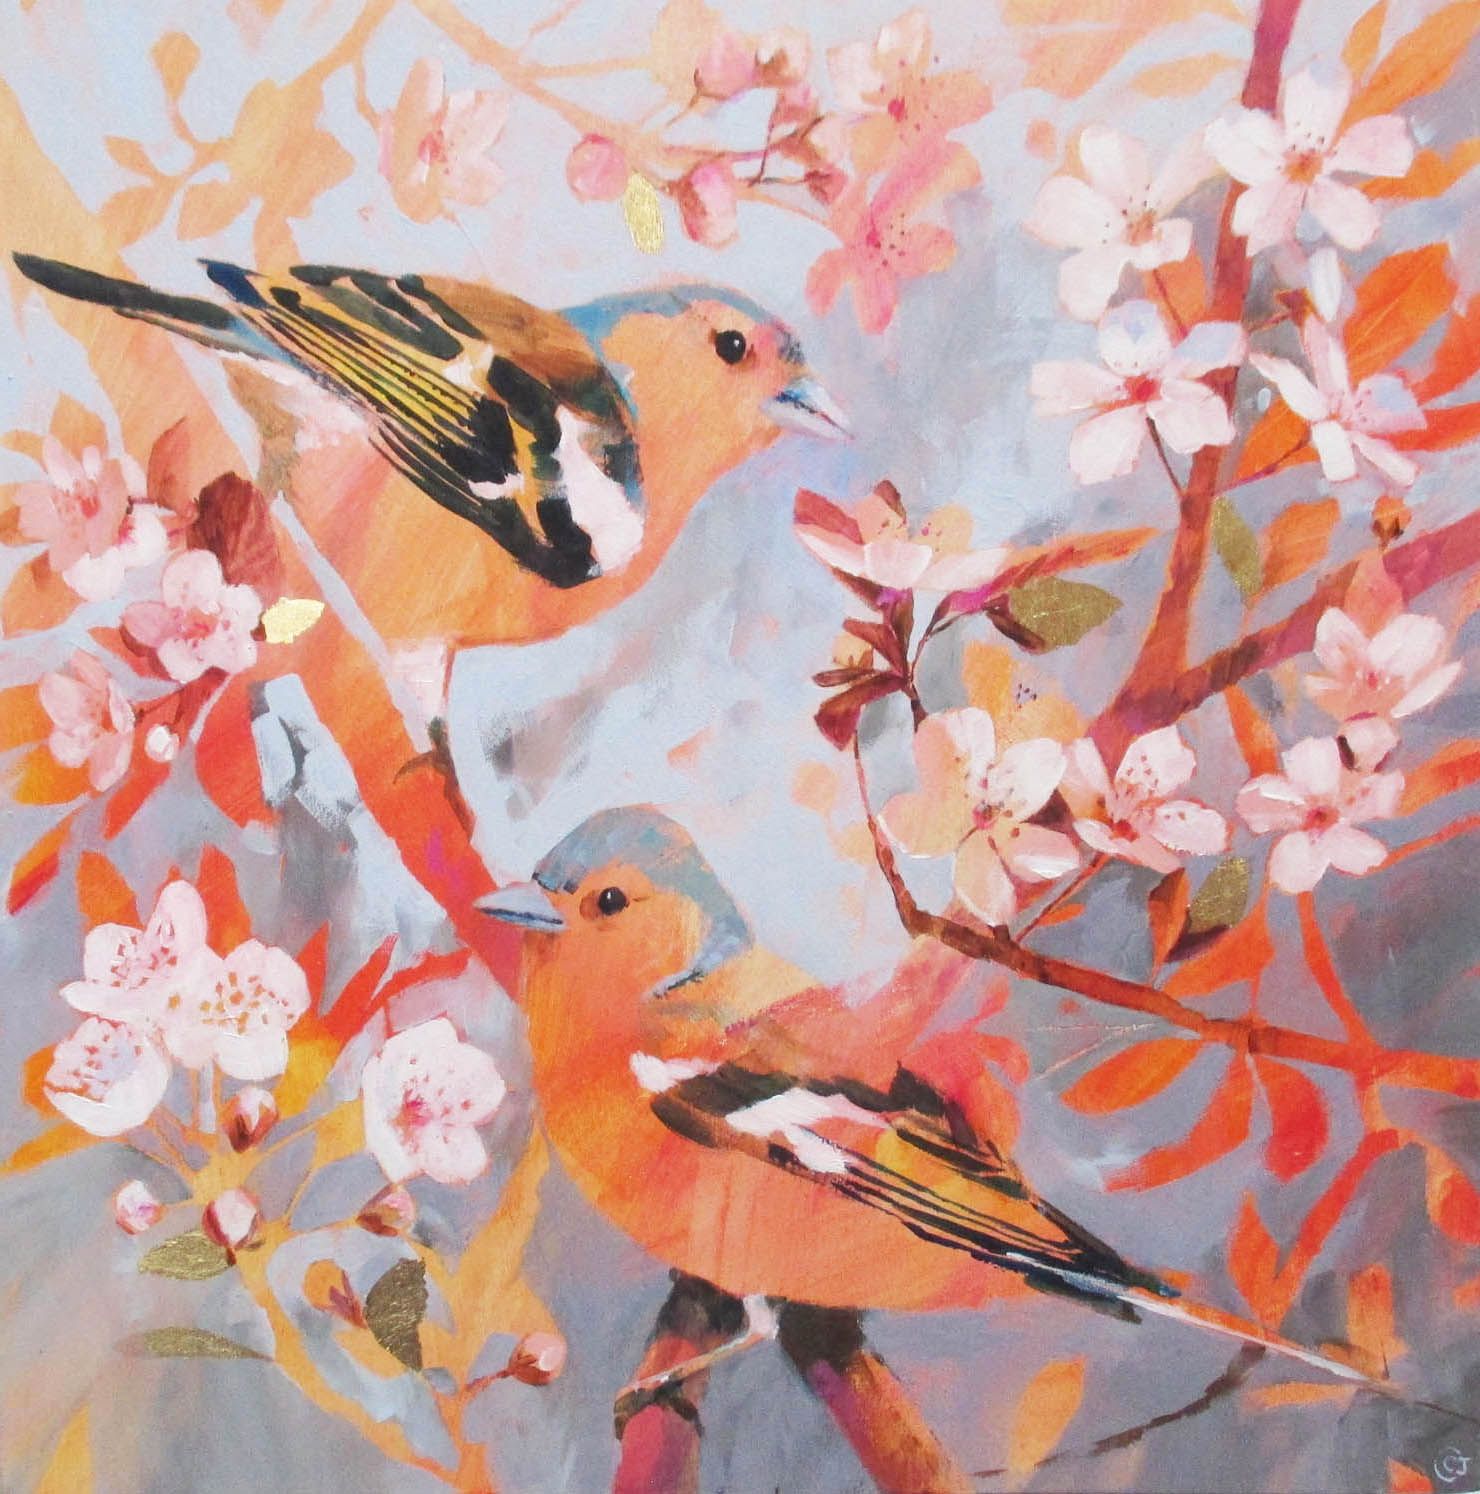 Chaffinches by carolyn carter